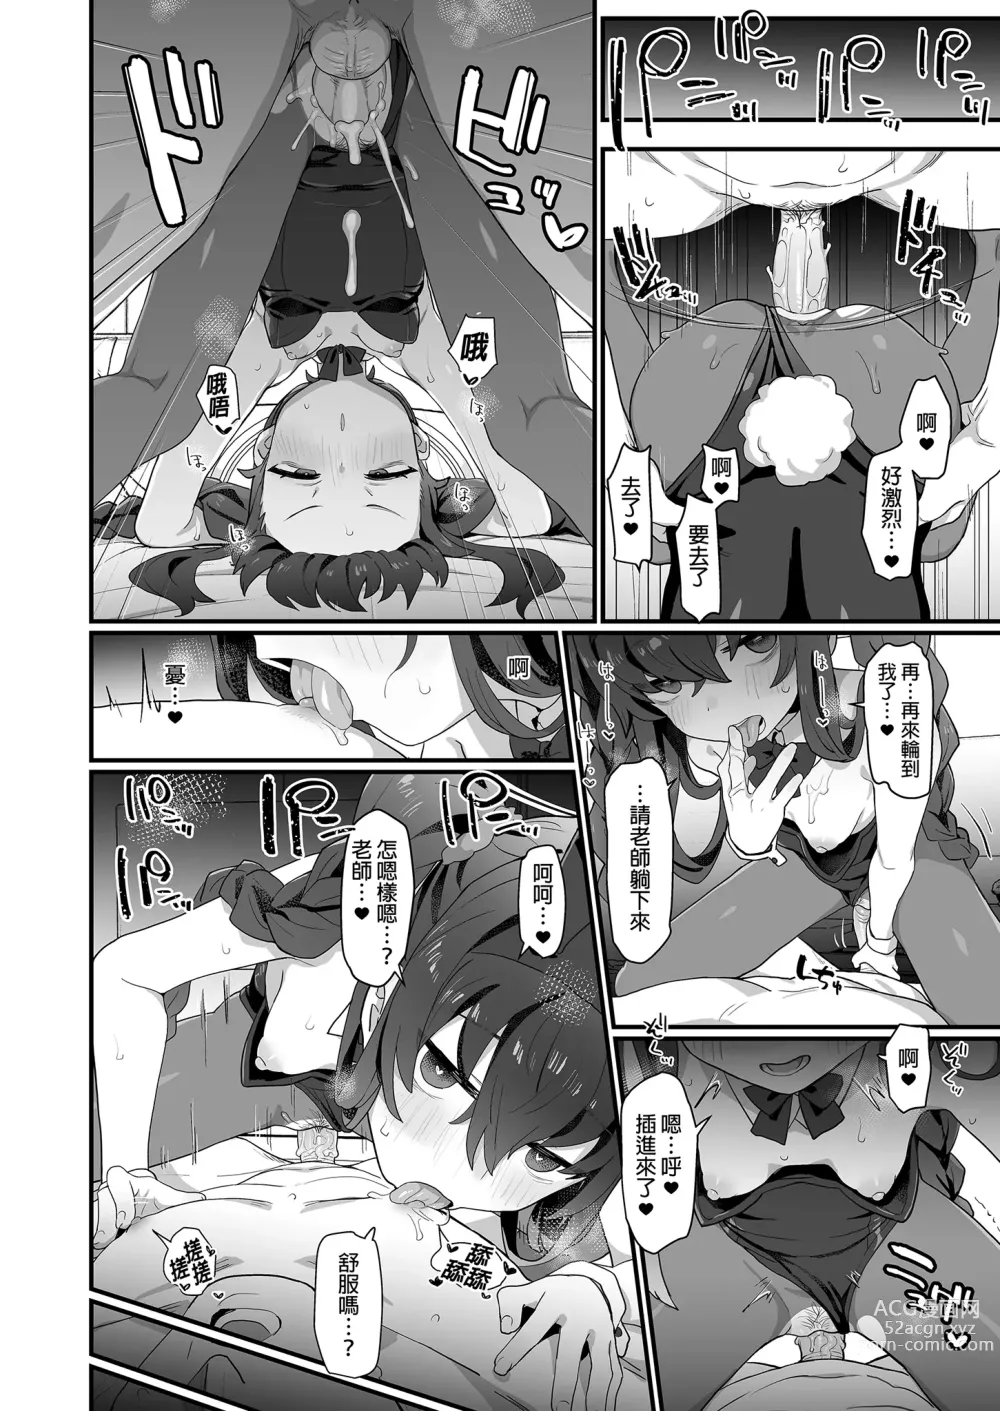 Page 28 of doujinshi 古書館願望清單 (decensored)